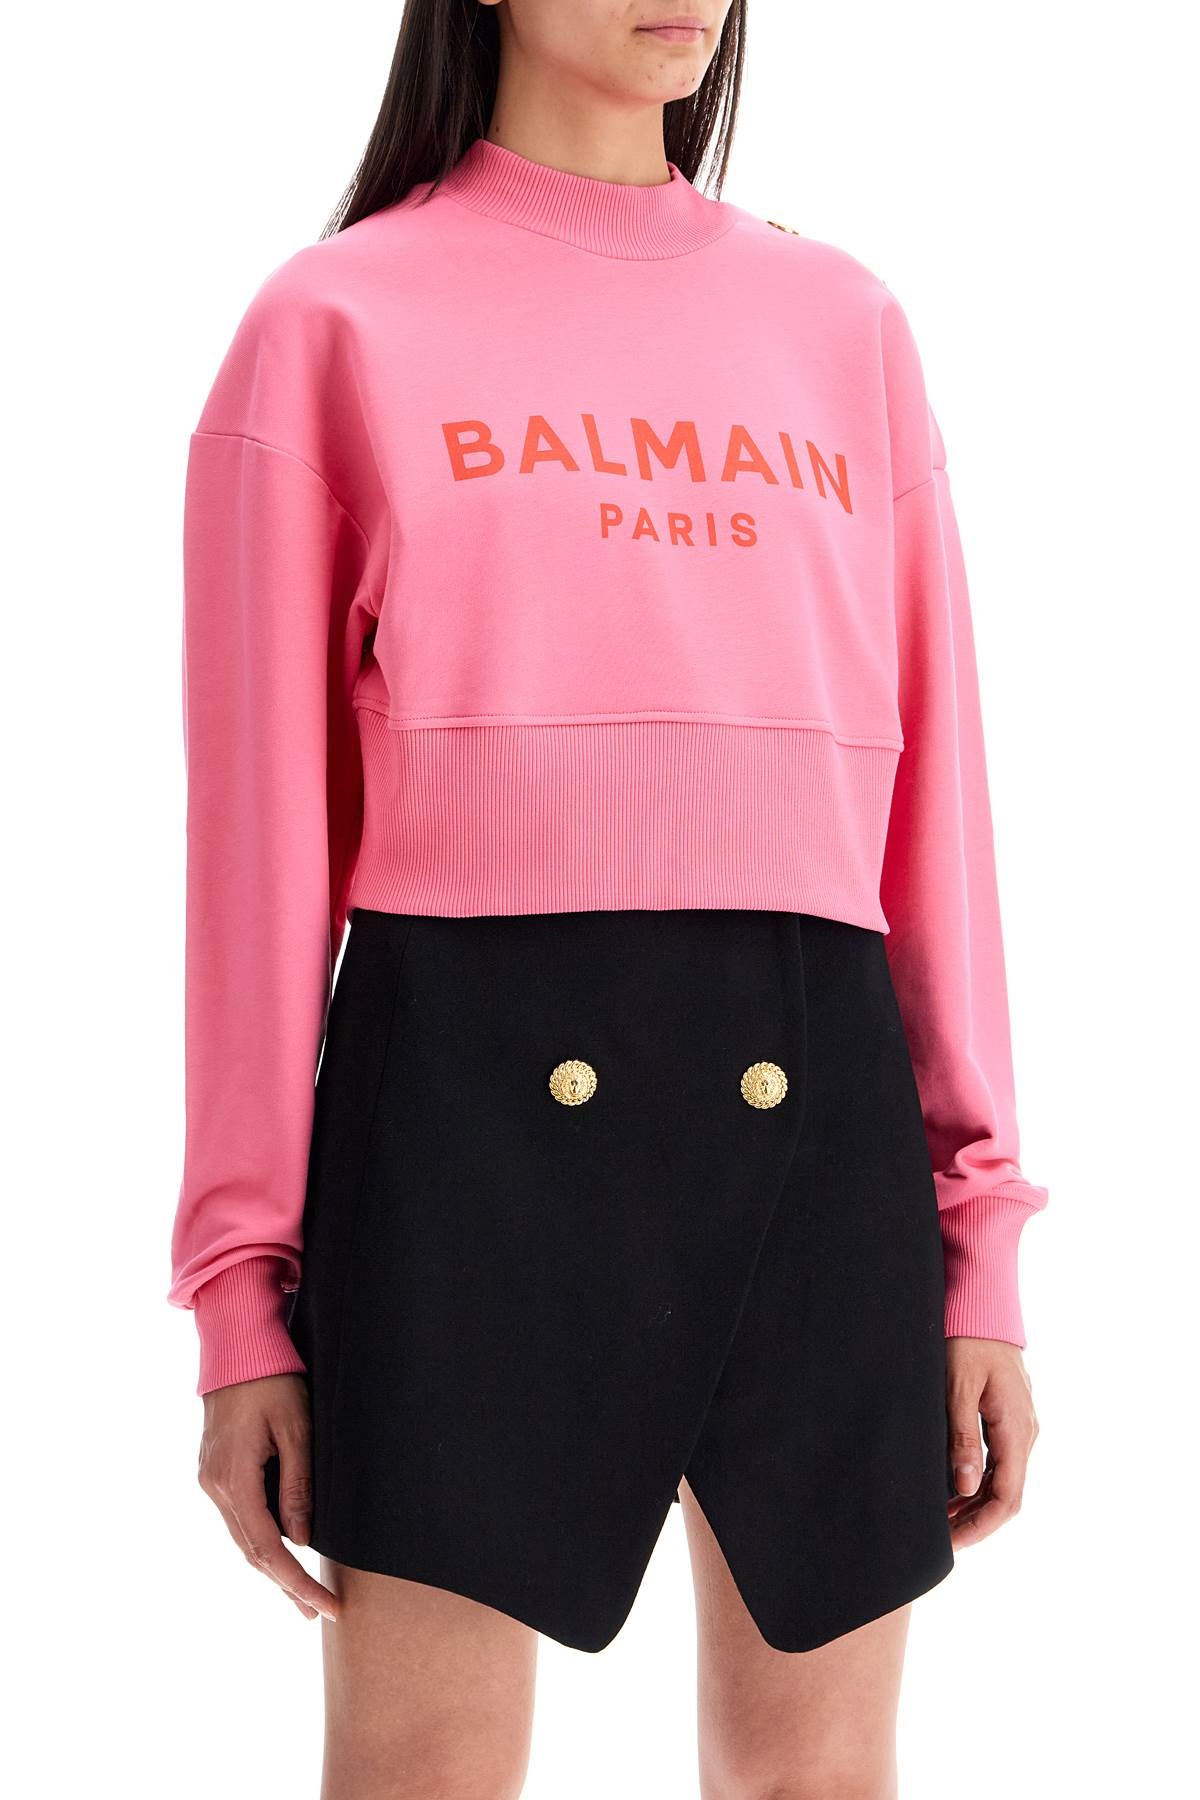 Balmain Cropped Sweatshirt With Buttons - 3